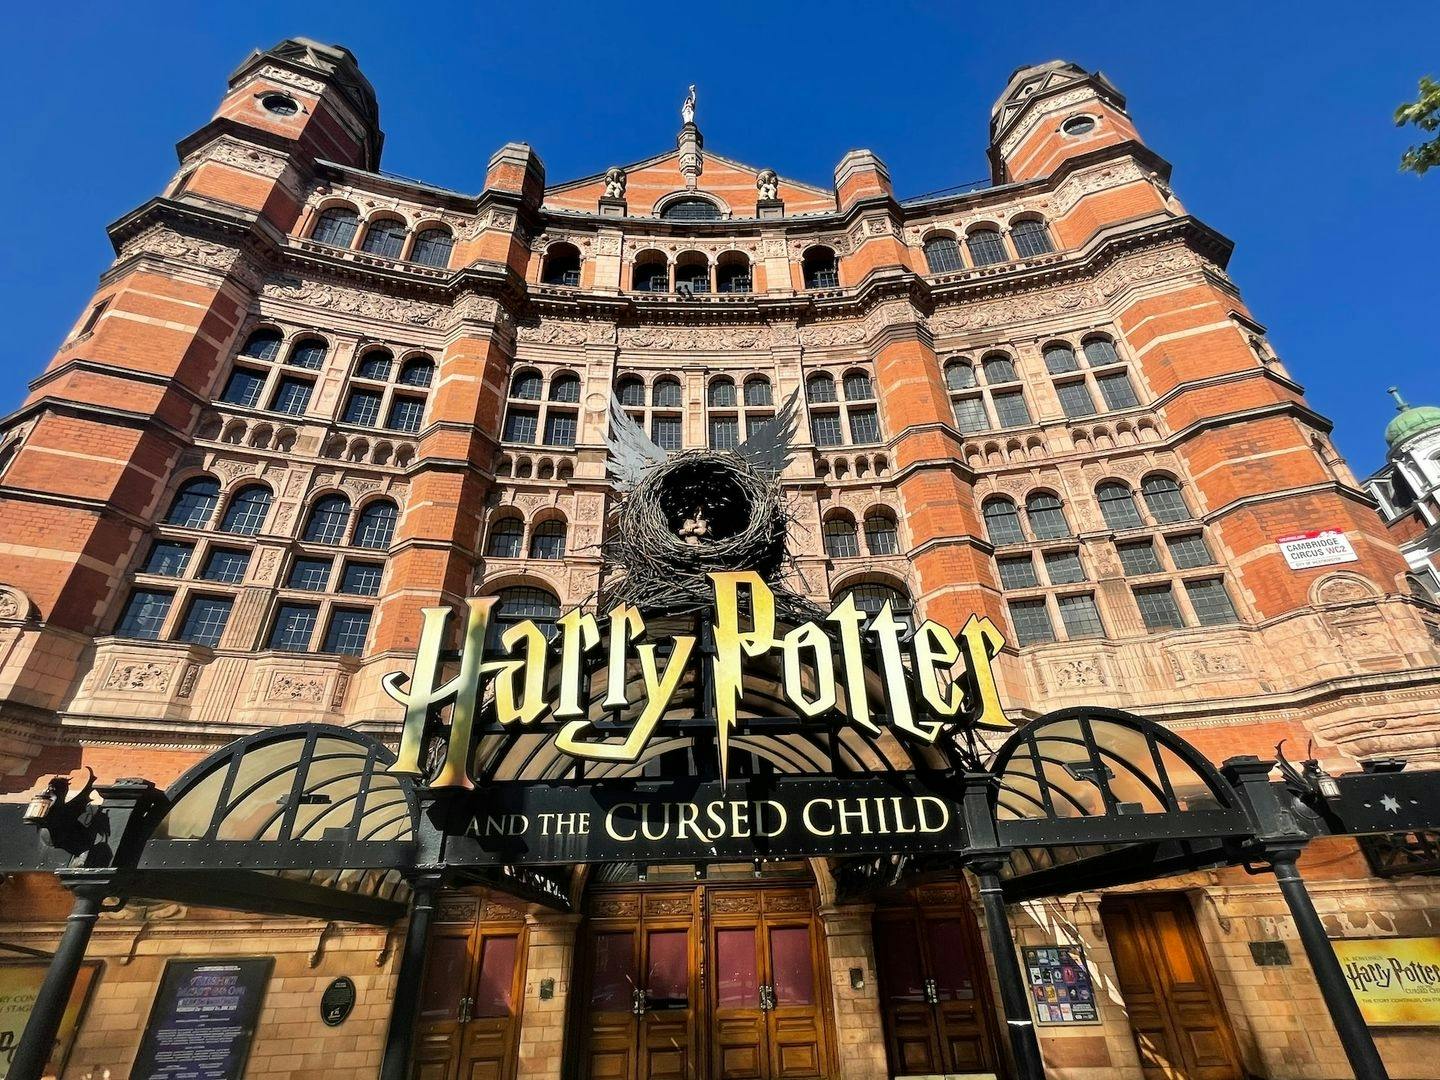 London's Harry Potter themed self guided walking tour on a mobile app. Musement